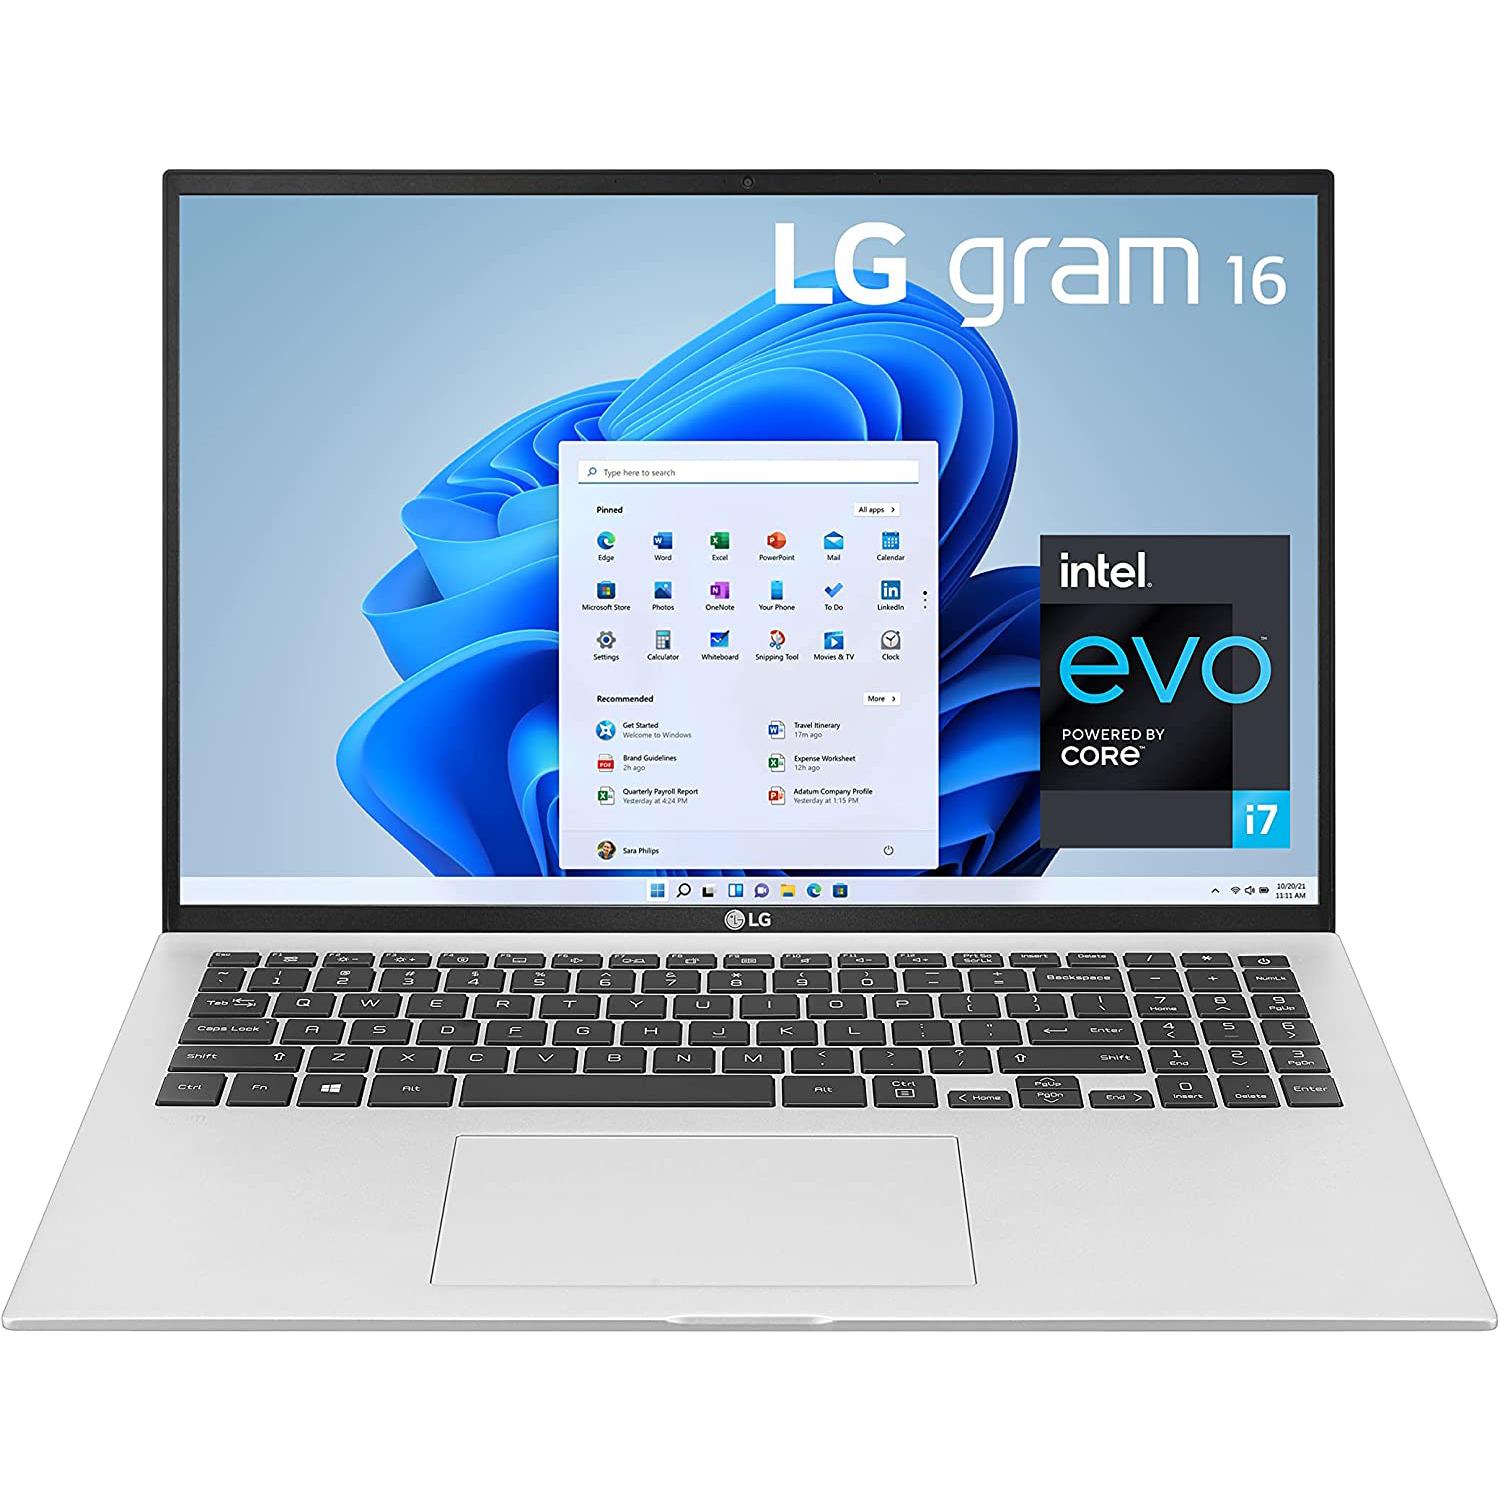 LG Gram 16in i7 16GB 1TB Notebook Laptop for $1099 Shipped